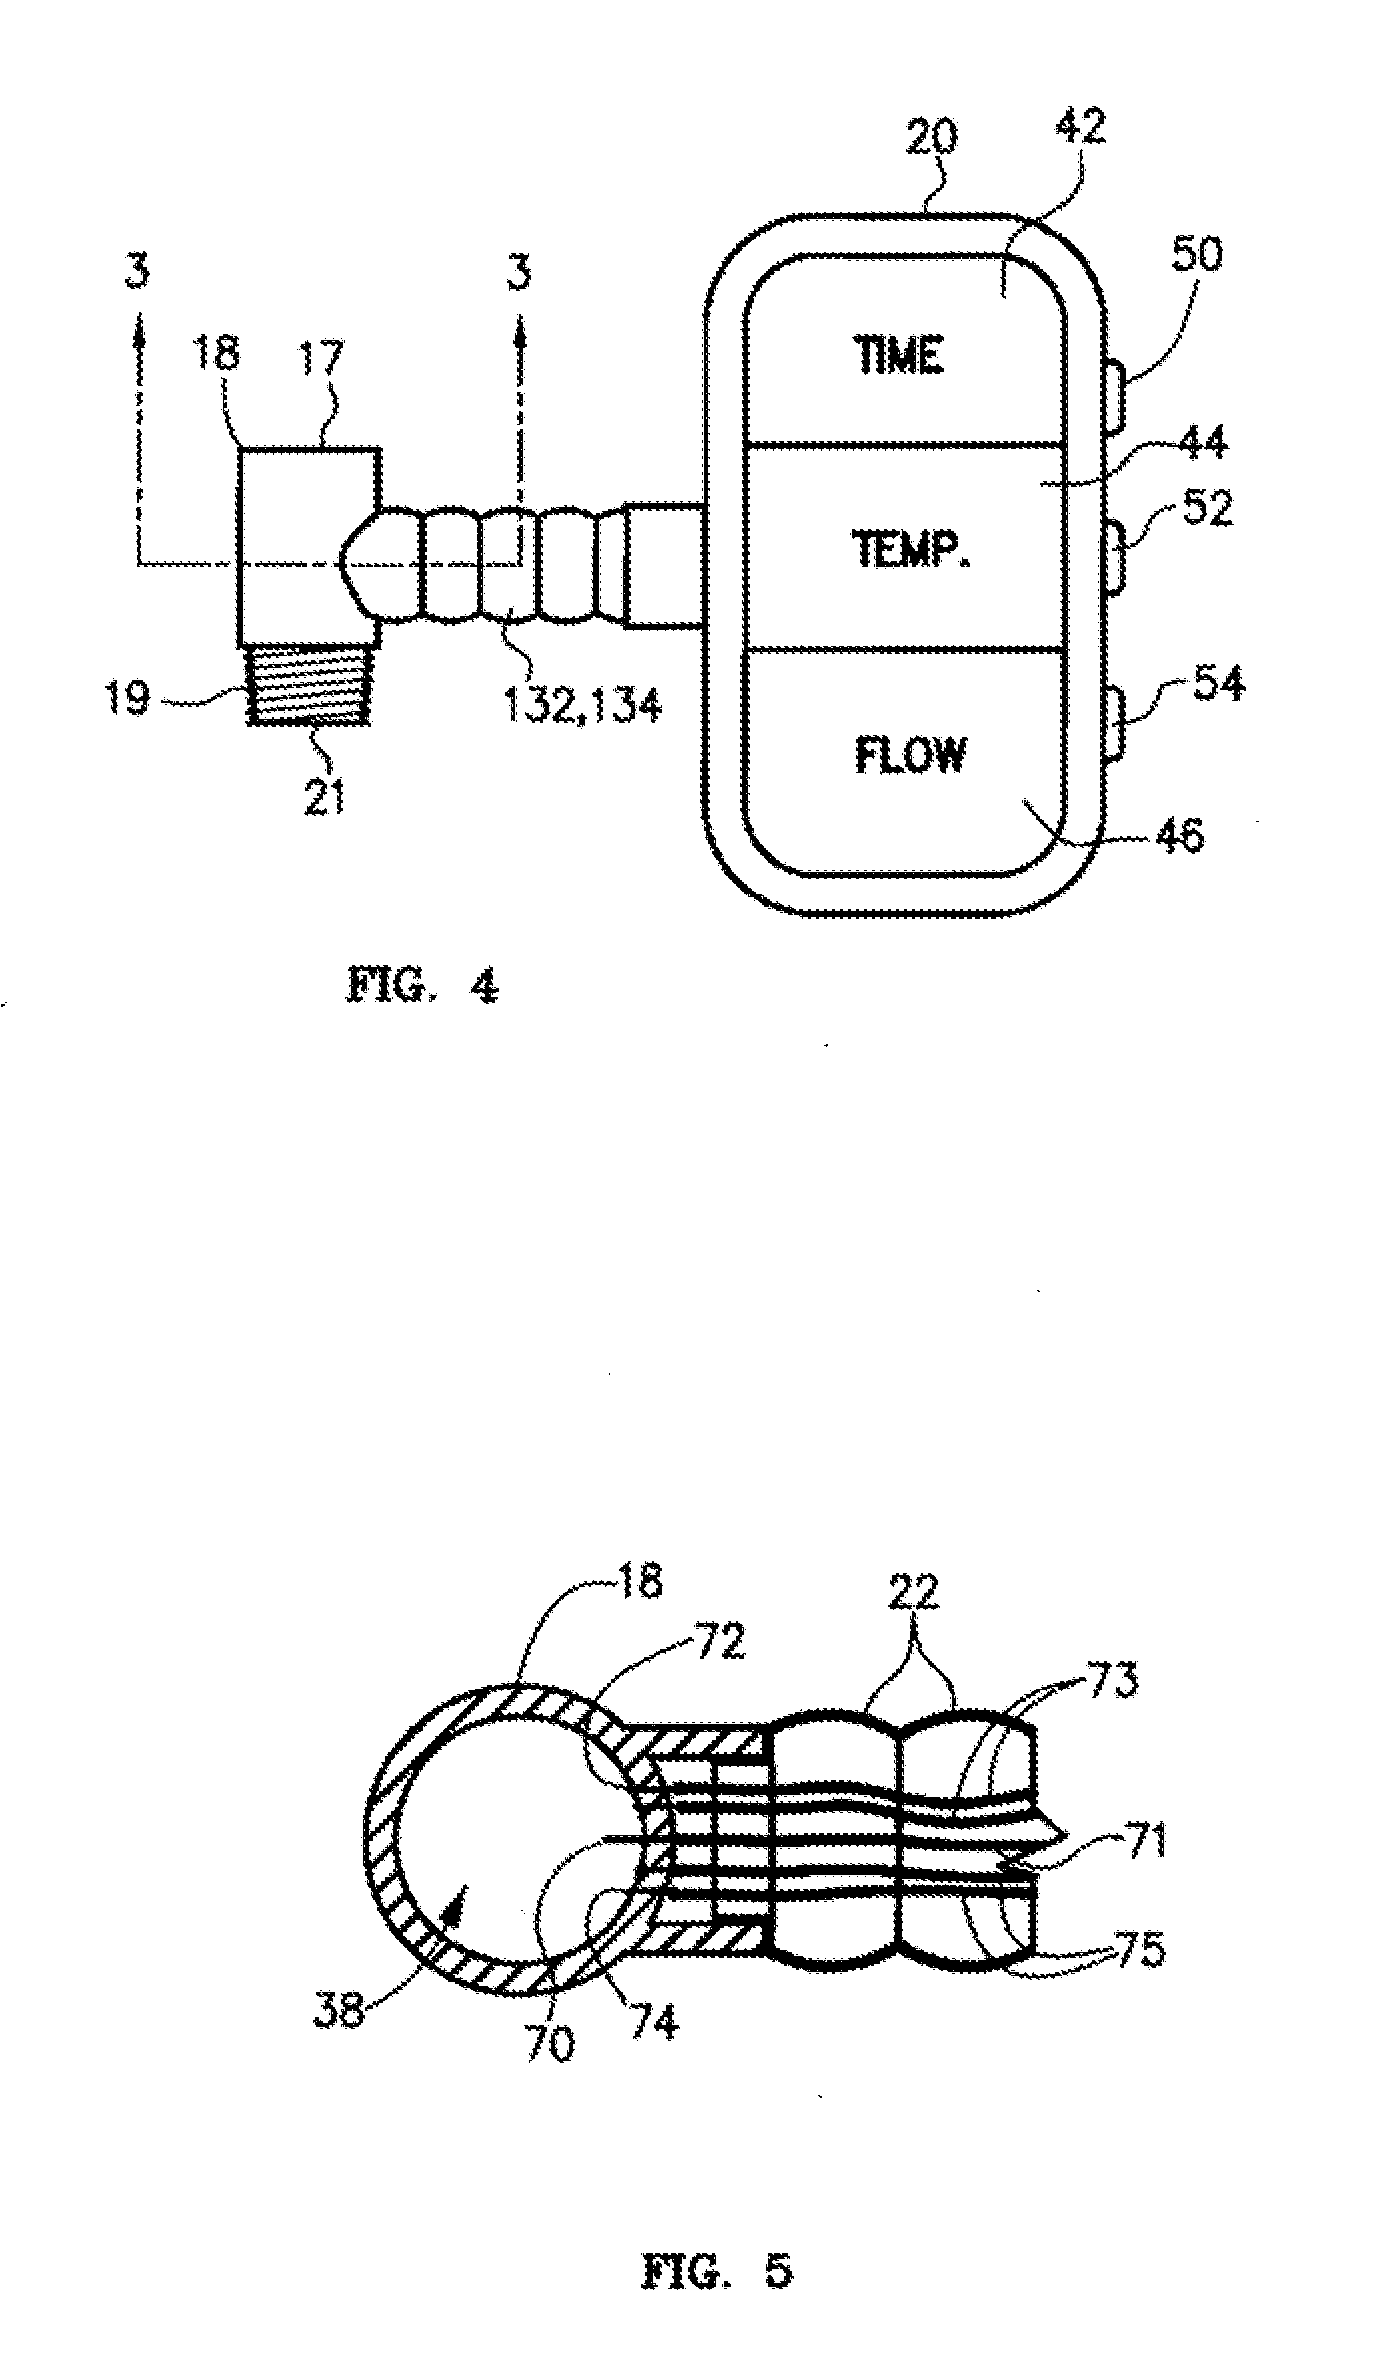 Water Parameter Apparatus for Displaying, Monitoring and/or Controlling Kitchen, Bathroom, Bath or Other Sink Faucets